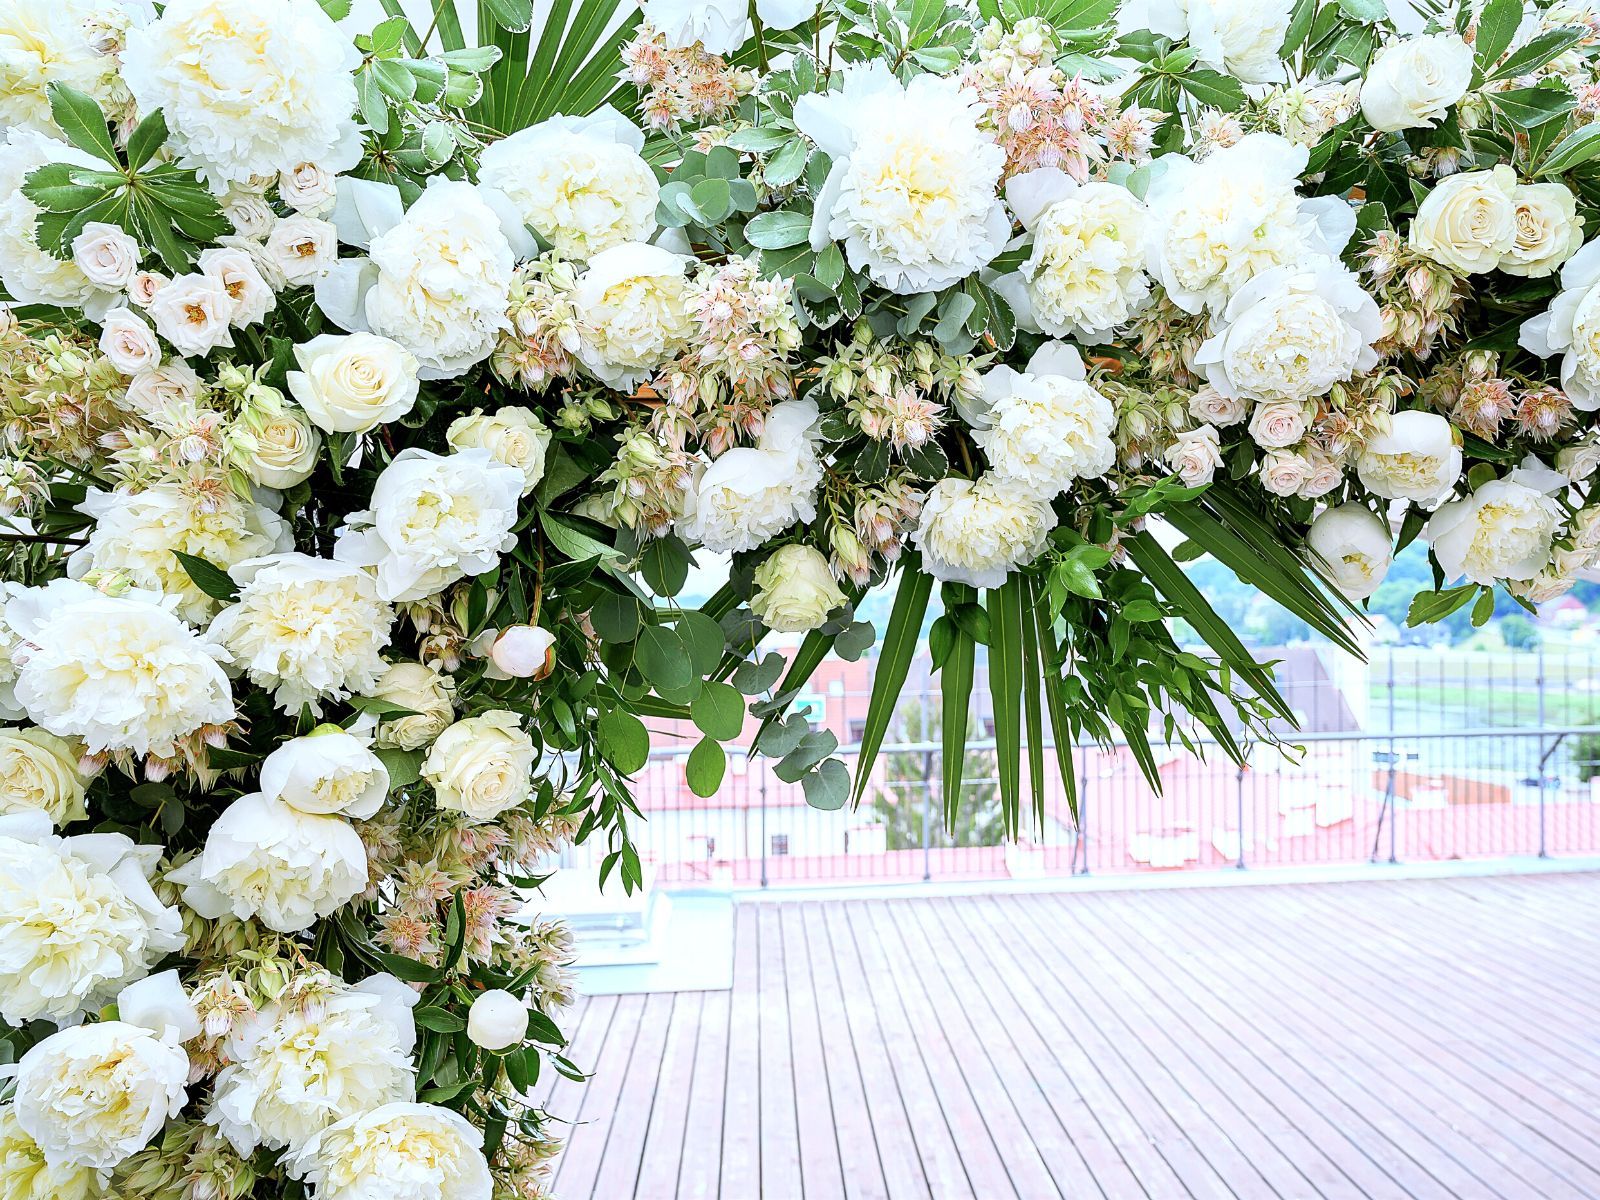 Protea Blushing Bride and White Peonies in an Arch Blog by Kristina Rimiene on Thursd